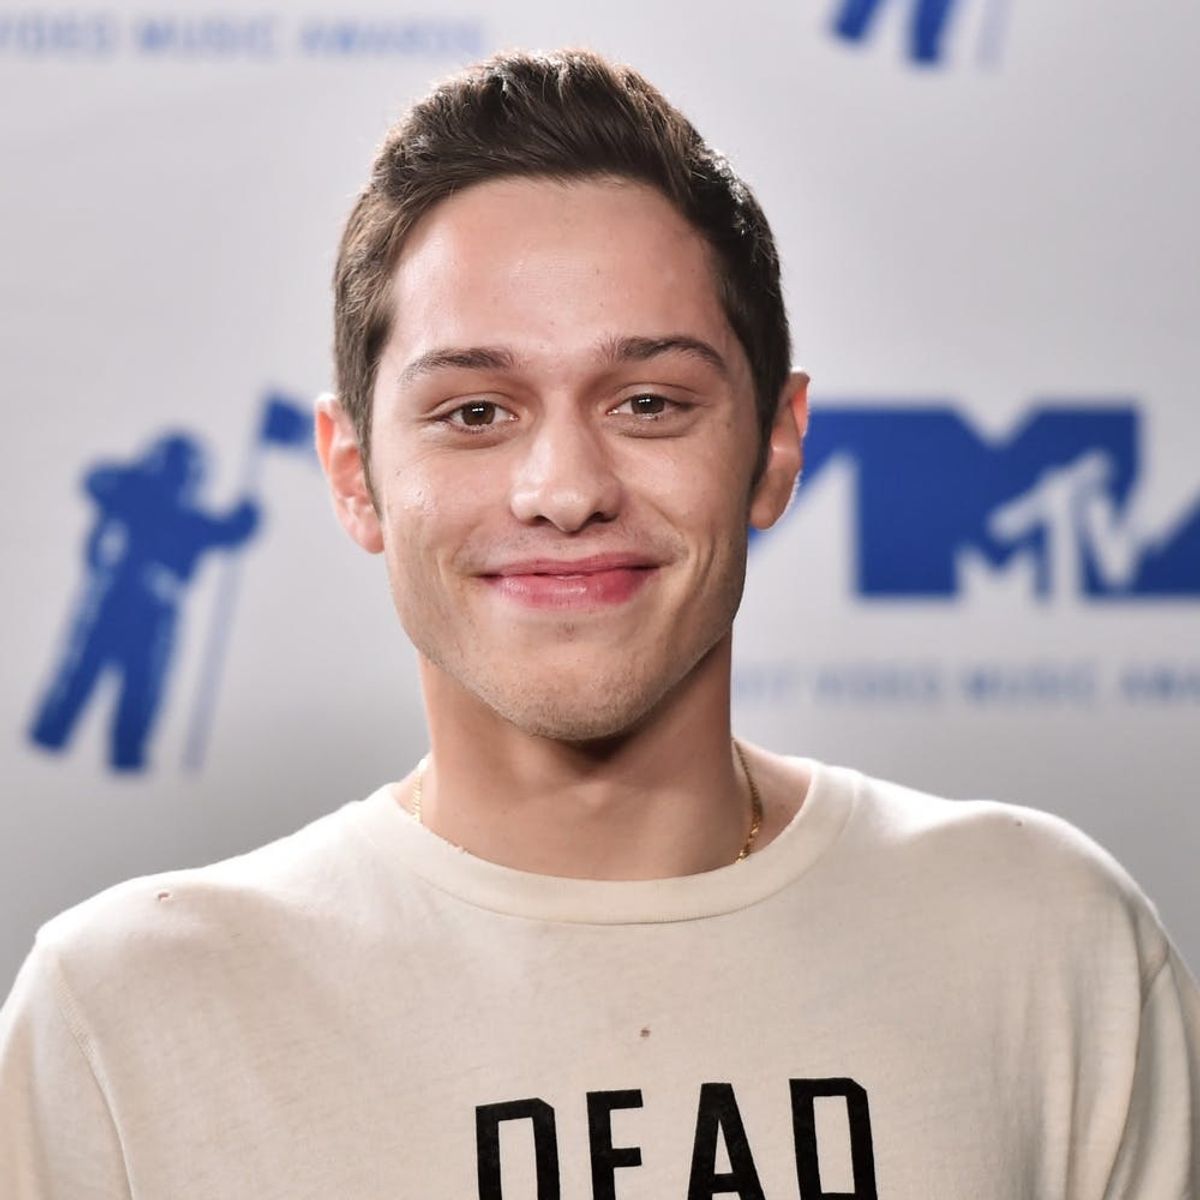 Pete Davidson Gets Two Tattoos to Show Off His Love for GF Ariana Grande